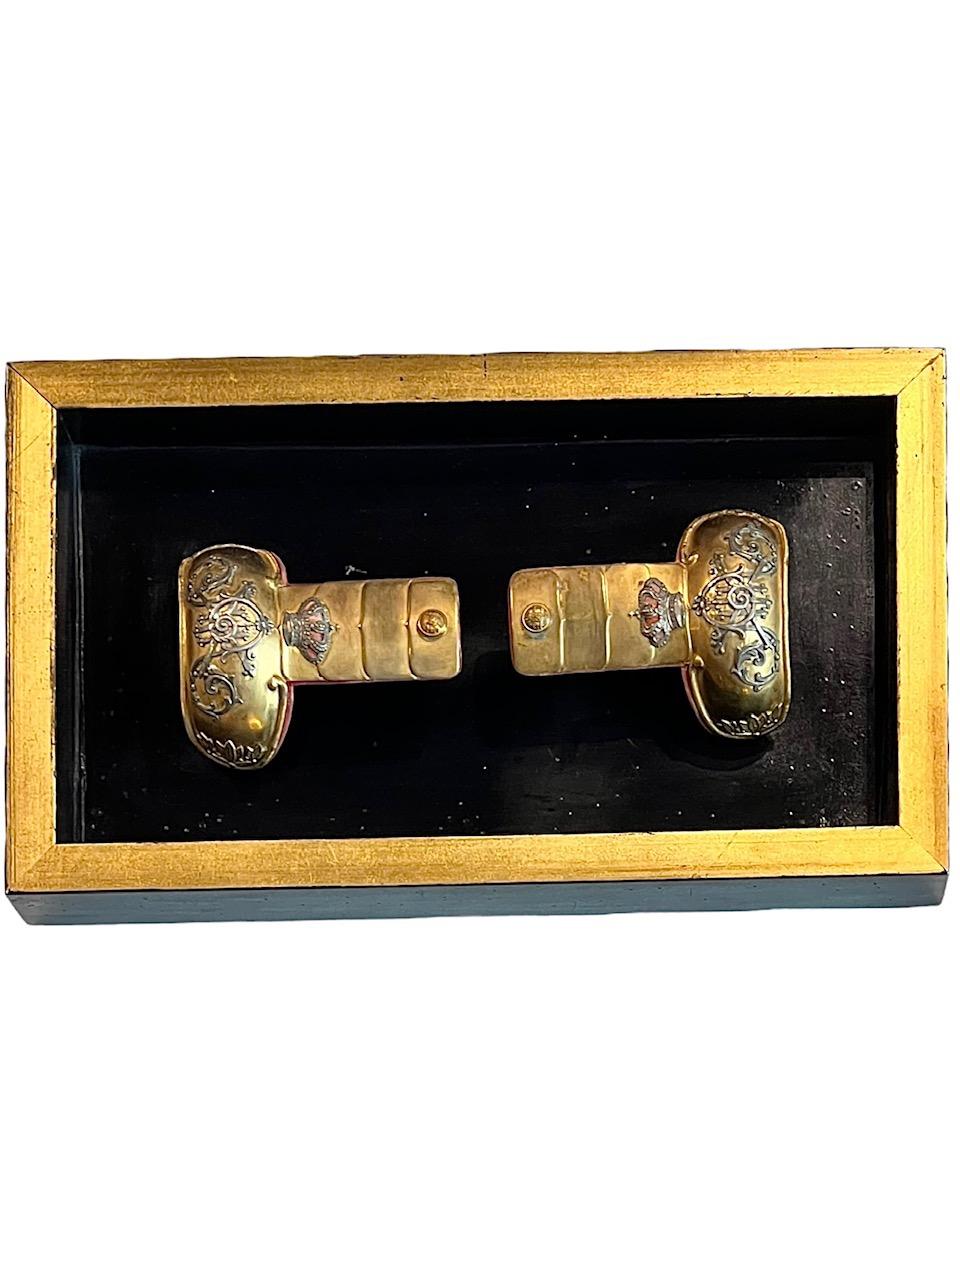 Presenting an exceptional pair of early 19th-century Spanish military shoulder epaulettes, a testament to the artistry and opulence of the era. Crafted from meticulously tooled gold-gilded brass, these epaulettes are not only a symbol of rank and